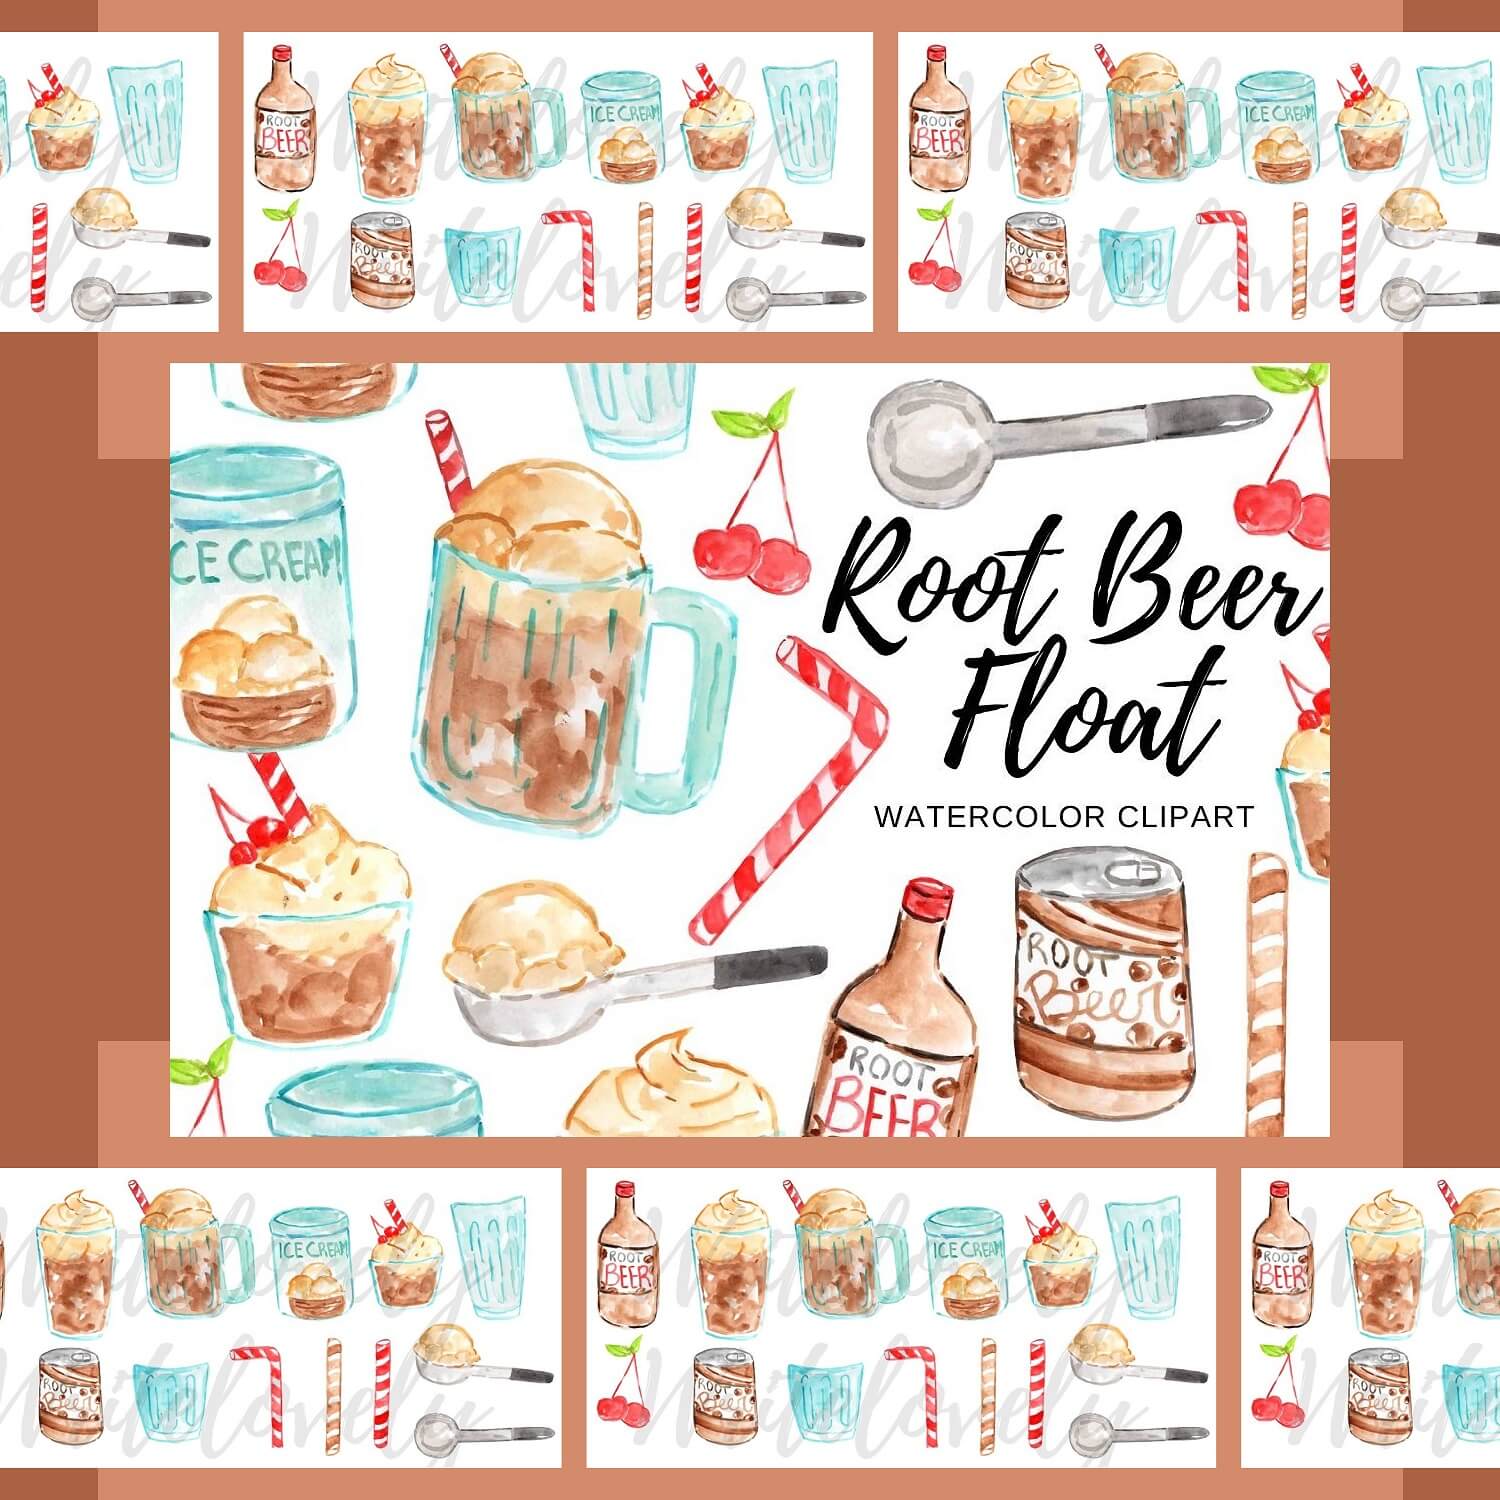 Image of cups with ice cream, colored tubes and root beer.